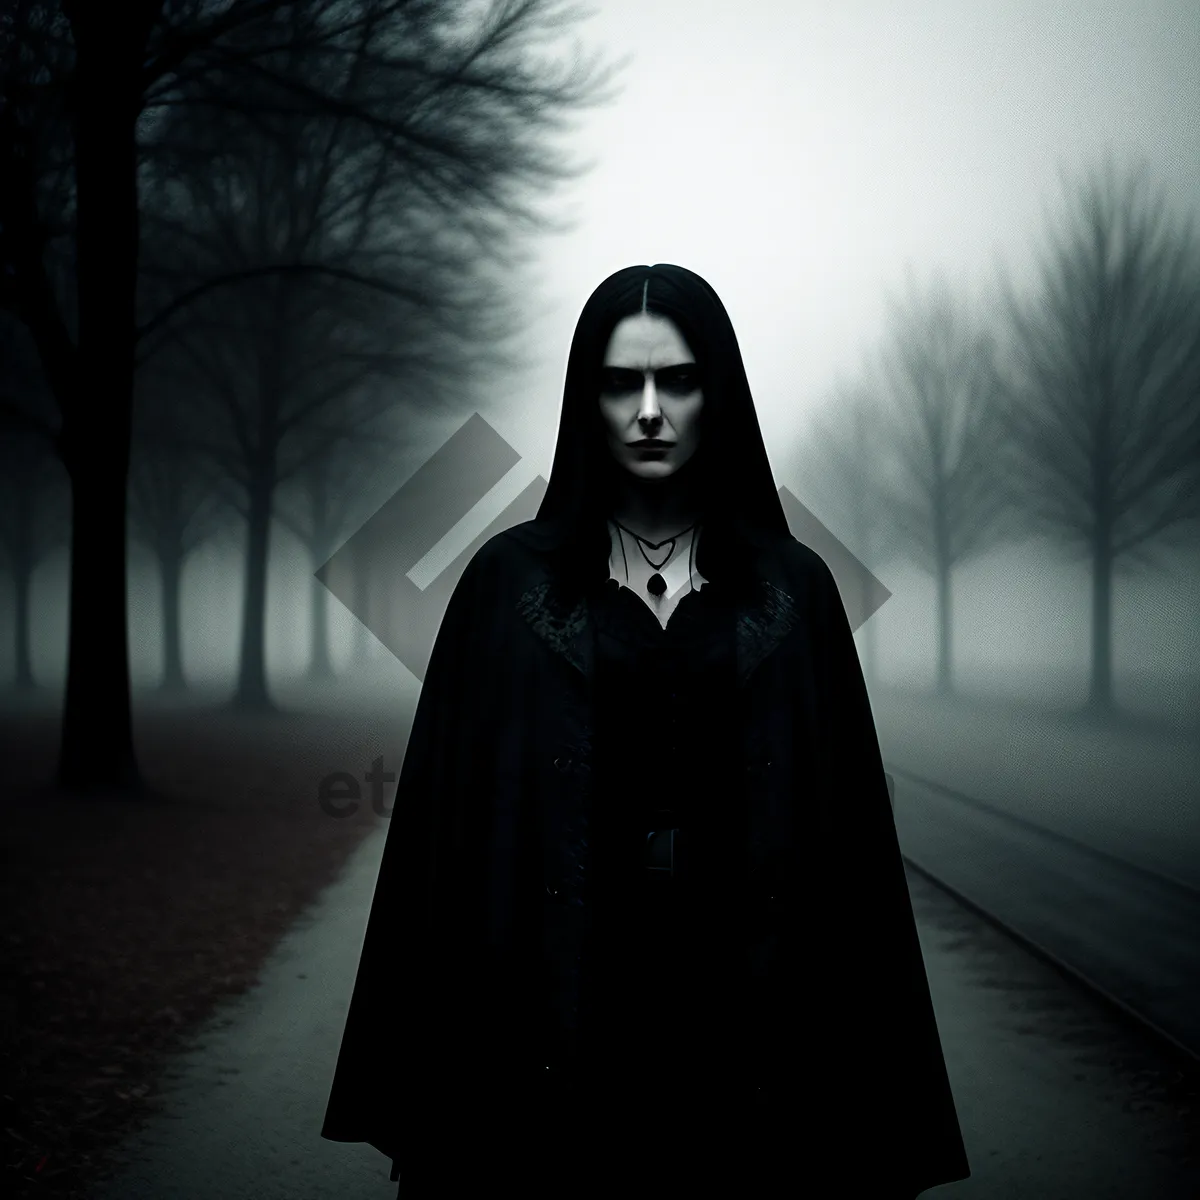 Picture of Dark Fashion Portrait - Cloaked Robed Figure with Intense Gaze